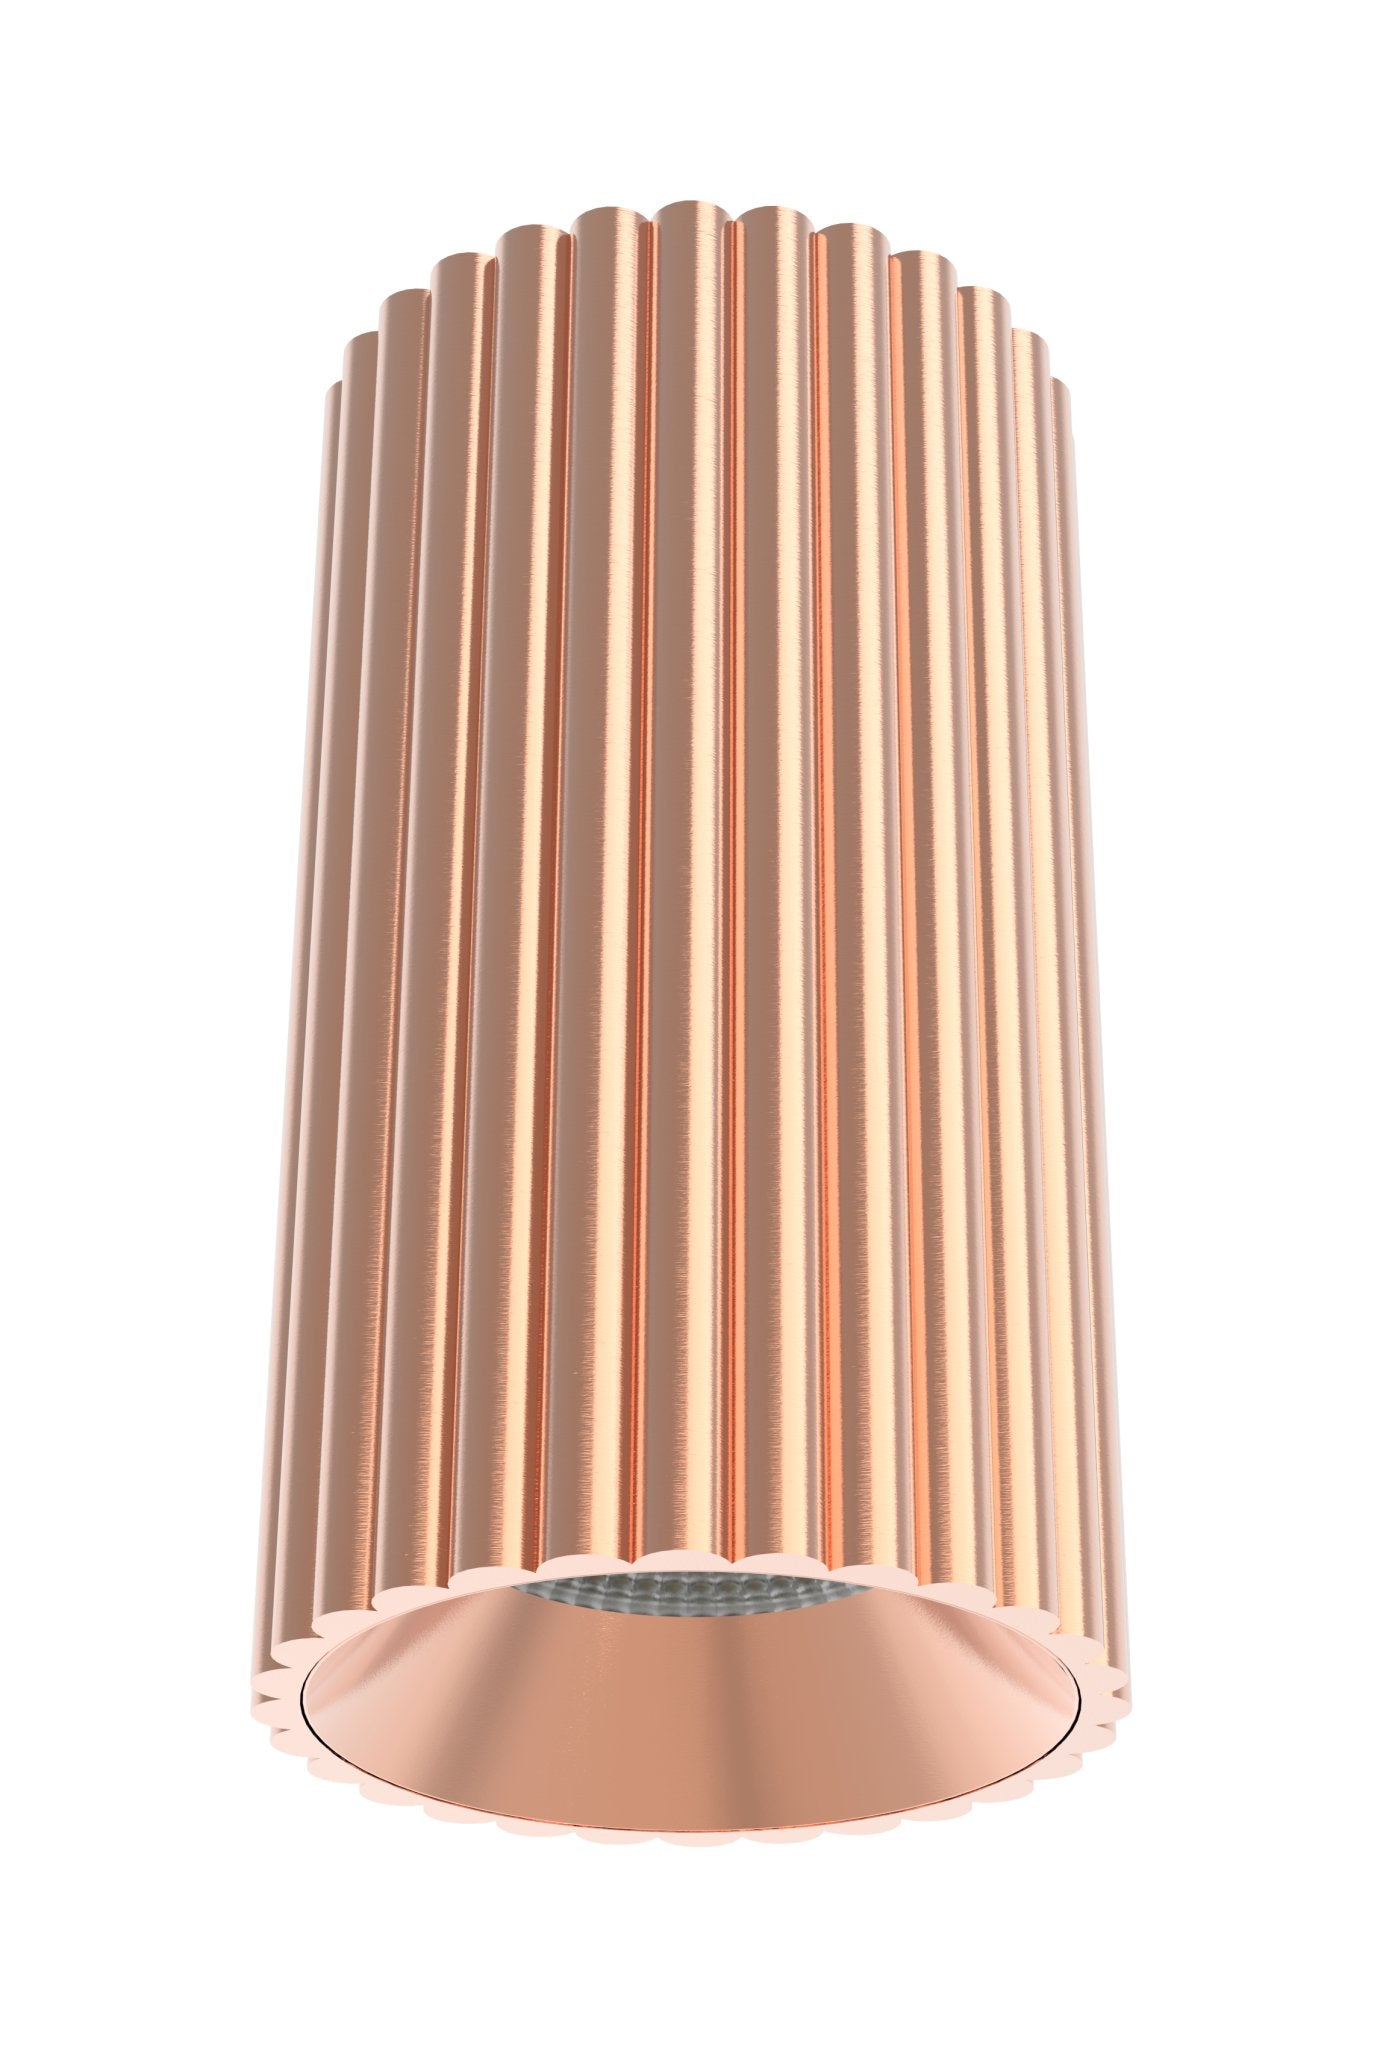 LC410 12W Ribbed Surface Mounted COB LED Downlight in Copper - Mases LightingLighting Creations